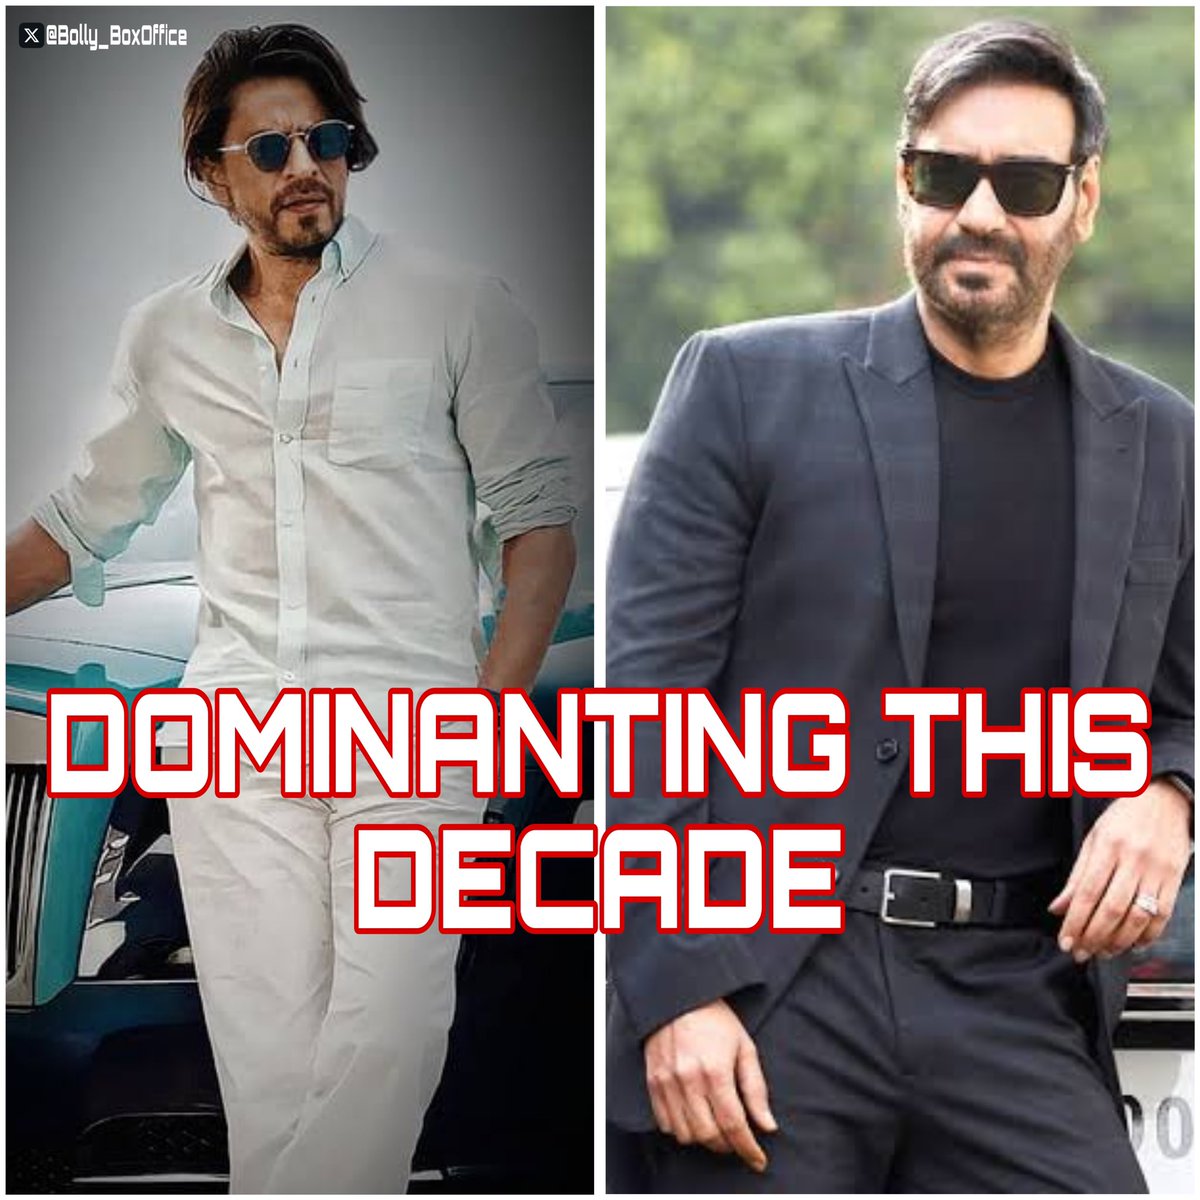 Multiple Blockbuster by Bollywood actors in this decade: #BoxOffice #IndiaBiz.

#ShahRukhKhan
⭐️#Pathaan: ATBB [All Time Grosser]
⭐️#Jawan: ATBB [All Time Grosser]

#AjayDevgn
⭐️#Tanhaji: Blockbuster 
⭐️#Drishyam2: Blockbuster 

<end of the list>